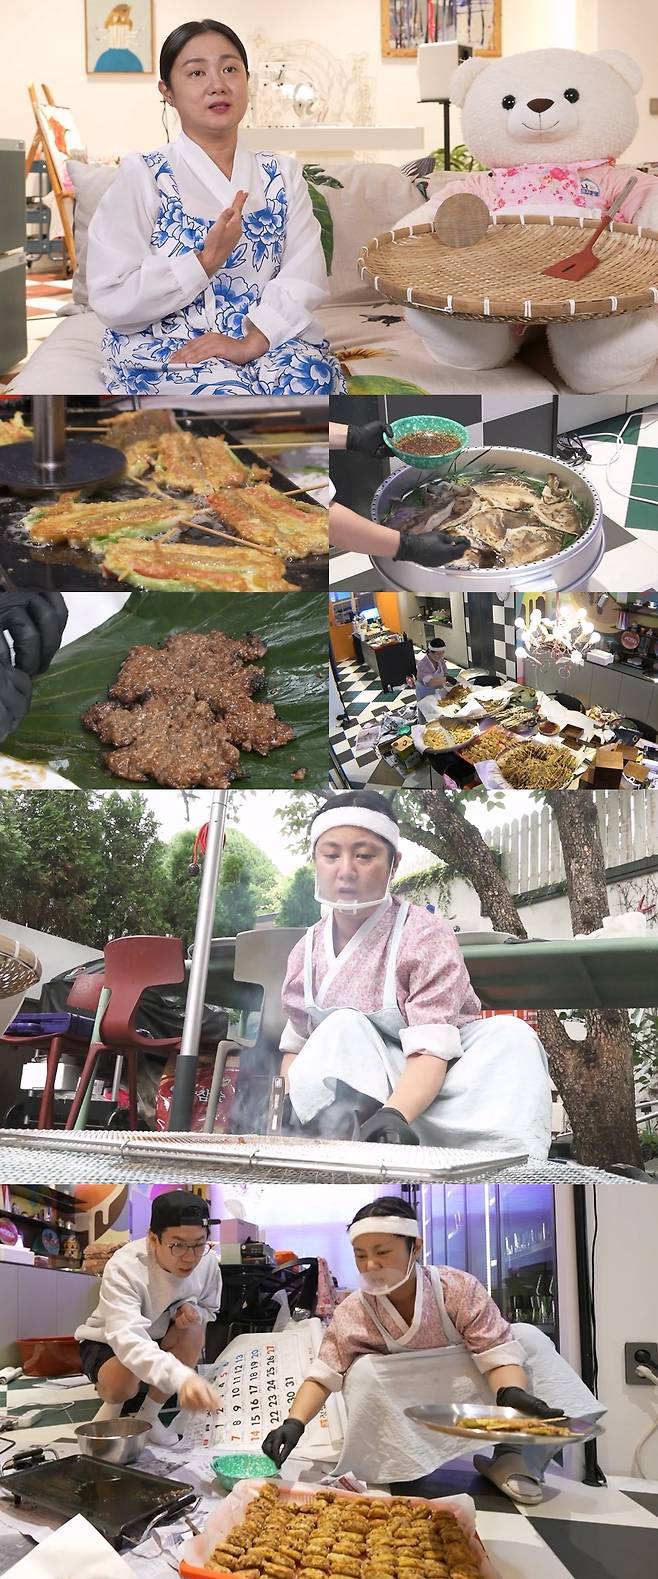 Park Na-rae is the top model for 20 servings of Chuseok food, from group to charcoal Tteok-galbi.MBC  ⁇  I Live Alone  ⁇ , which is broadcasted at 11:10 pm on August 29, will show the appearance of Narae, a former artisan who plays The Speech for 20 Chuseok food ahead of Chuseok holidays.Park Na-rae, who appeared in the Suragan Nine outfit after the dawn wake up, said, Hello. I am a teacher, Park Na-rae. I am planning to Speech 20 holiday foods to thank you.Narae The Kitchen is full of festive food ingredients such as flour, flour, and extra-large cooking oil.It turns out that Park Na-rae was doing the Speech for the second day of Chuseok food. After the pork skewer and the chrysanthemum round ball, which were completed with the grandmother recipe and Mother recipe the day before, they start breaking eggs for full-scale frying.The Speech process, which does not end, complains that the holiday syndrome is already coming.Park Na-raes holiday food The Speech goes beyond  ⁇ Narae The Kitchen ⁇  to  ⁇ Narae Madang ⁇ .Park Na-rae, who started to bake Tteok-galbi on a grill from Madang to charcoal, boasts a tremendous passion and scale, saying that it is not a maiden today but a paddle.